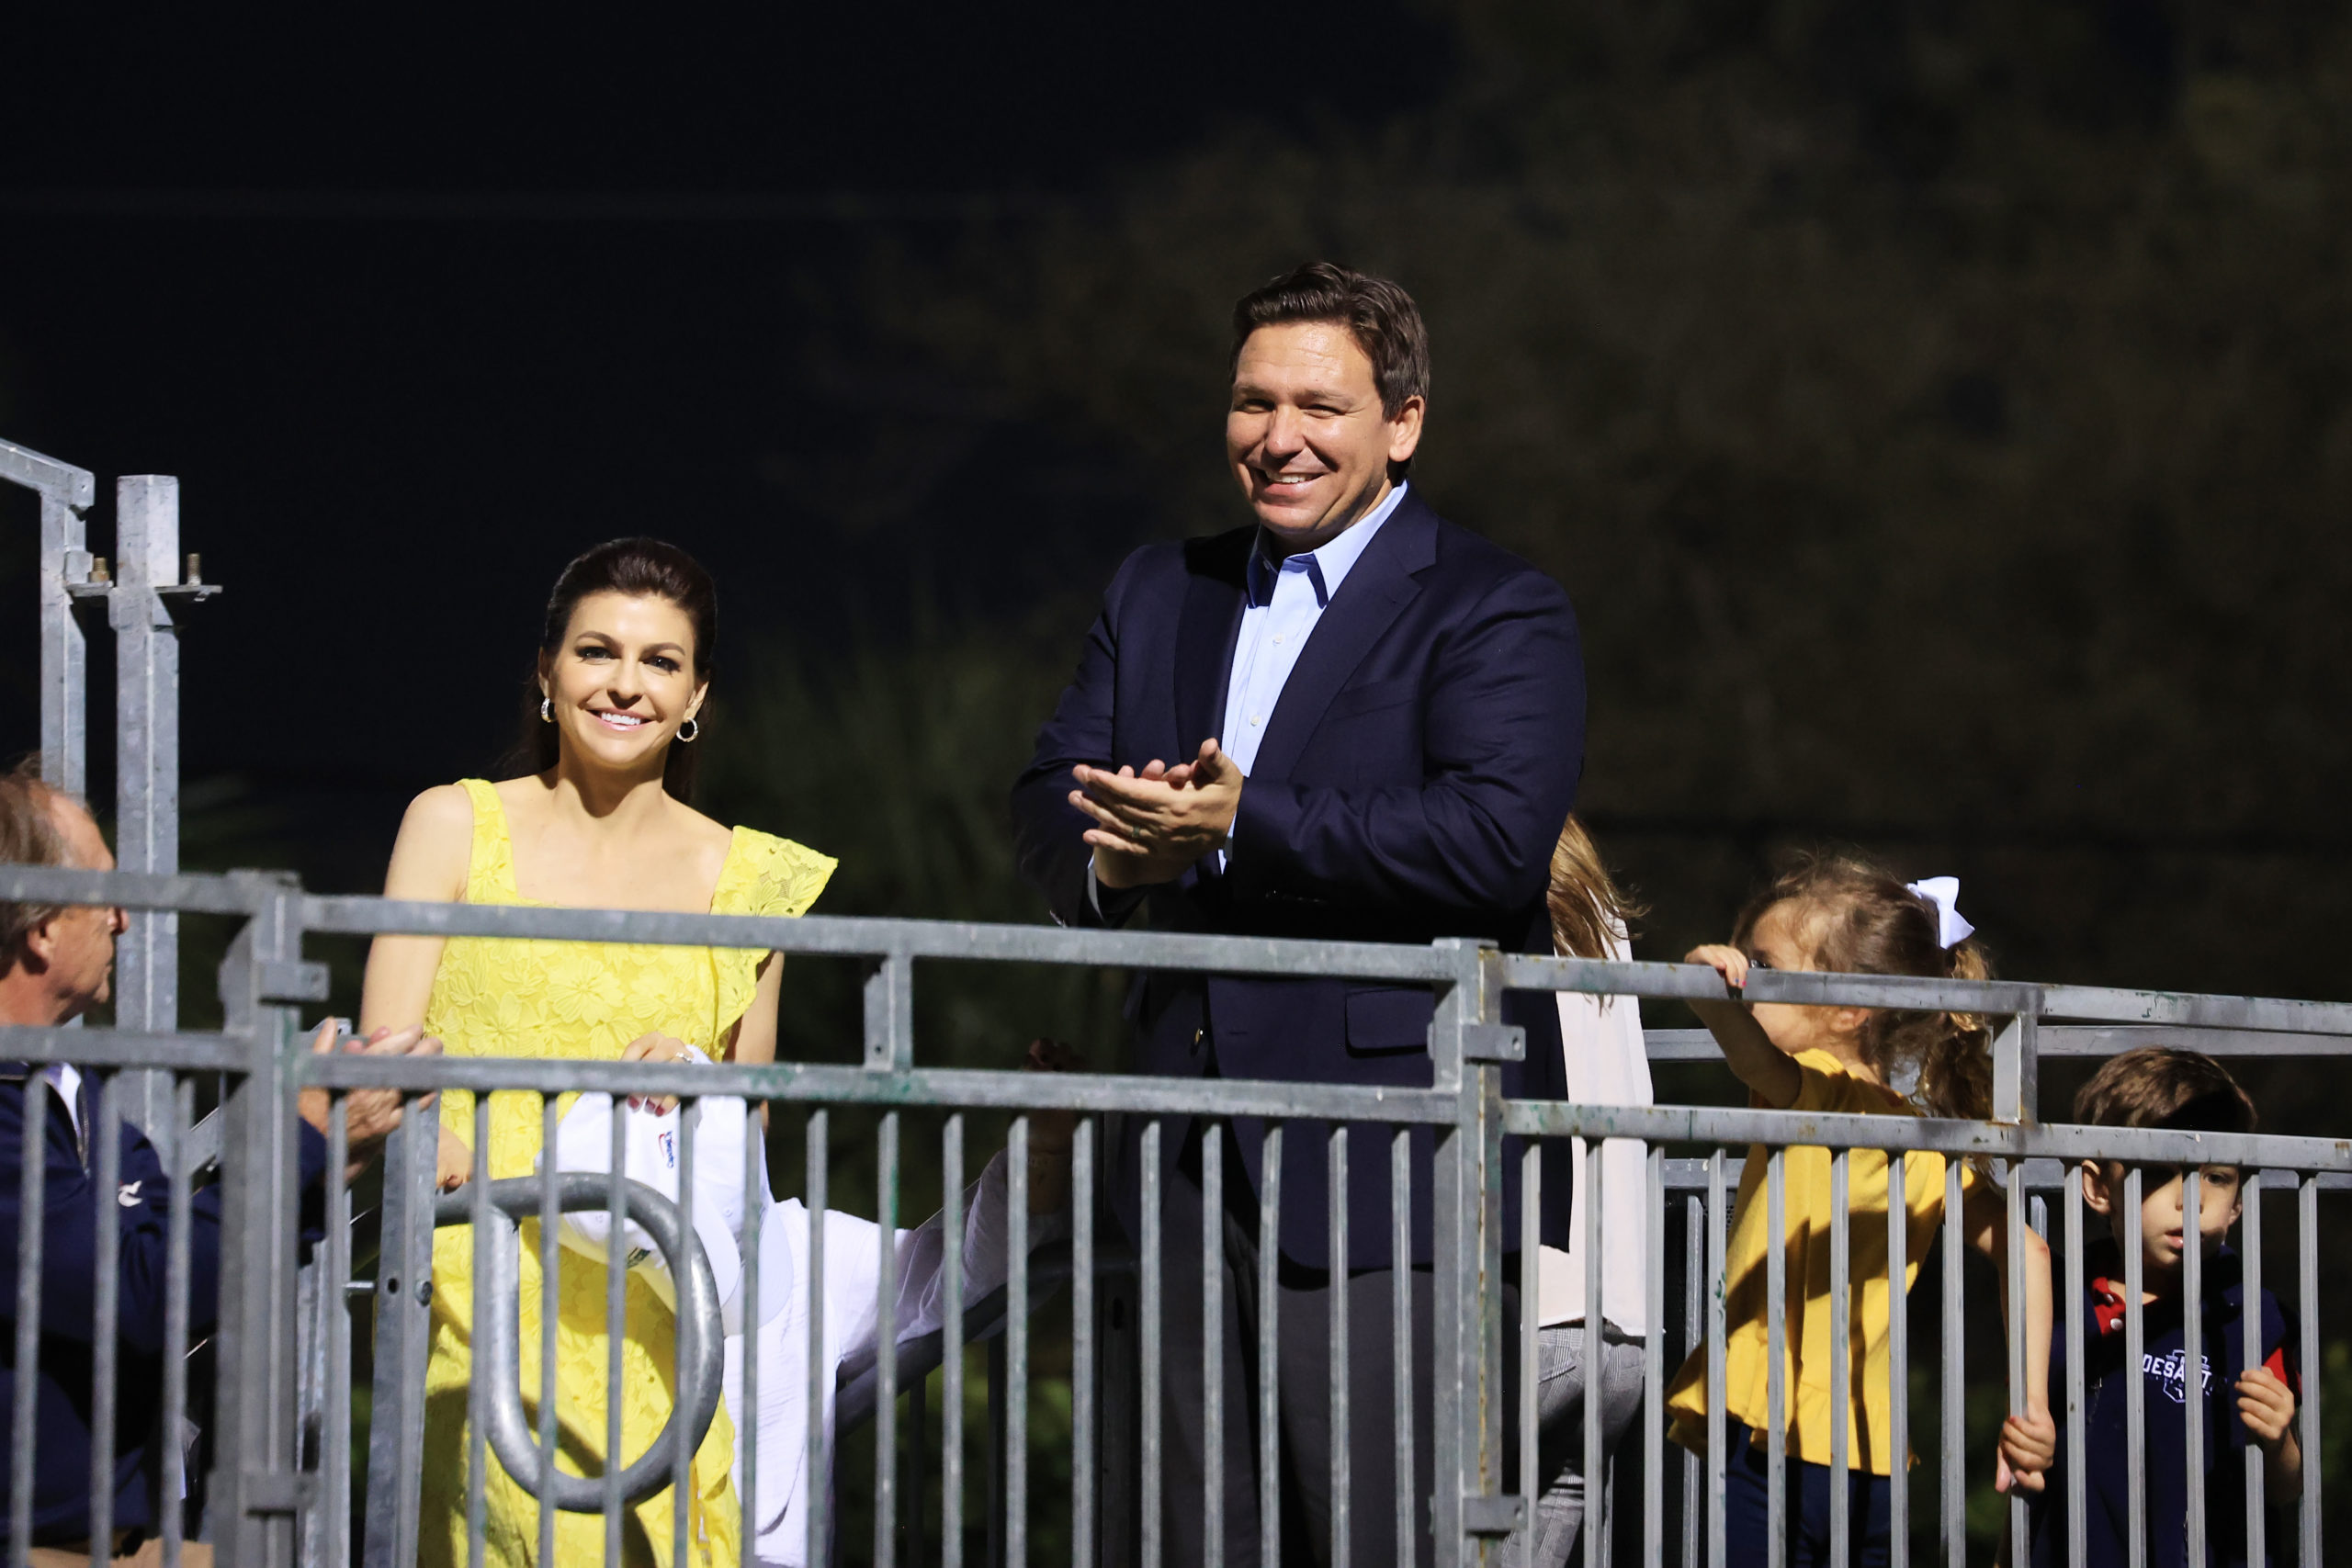  Florida Gov. Ron DeSantis and wife Casey DeSantis look on during The Match 7 at Pelican Golf Club on December 10, 2022 in Belleair, Florida. (Photo by David Cannon/Getty Images for The Match)